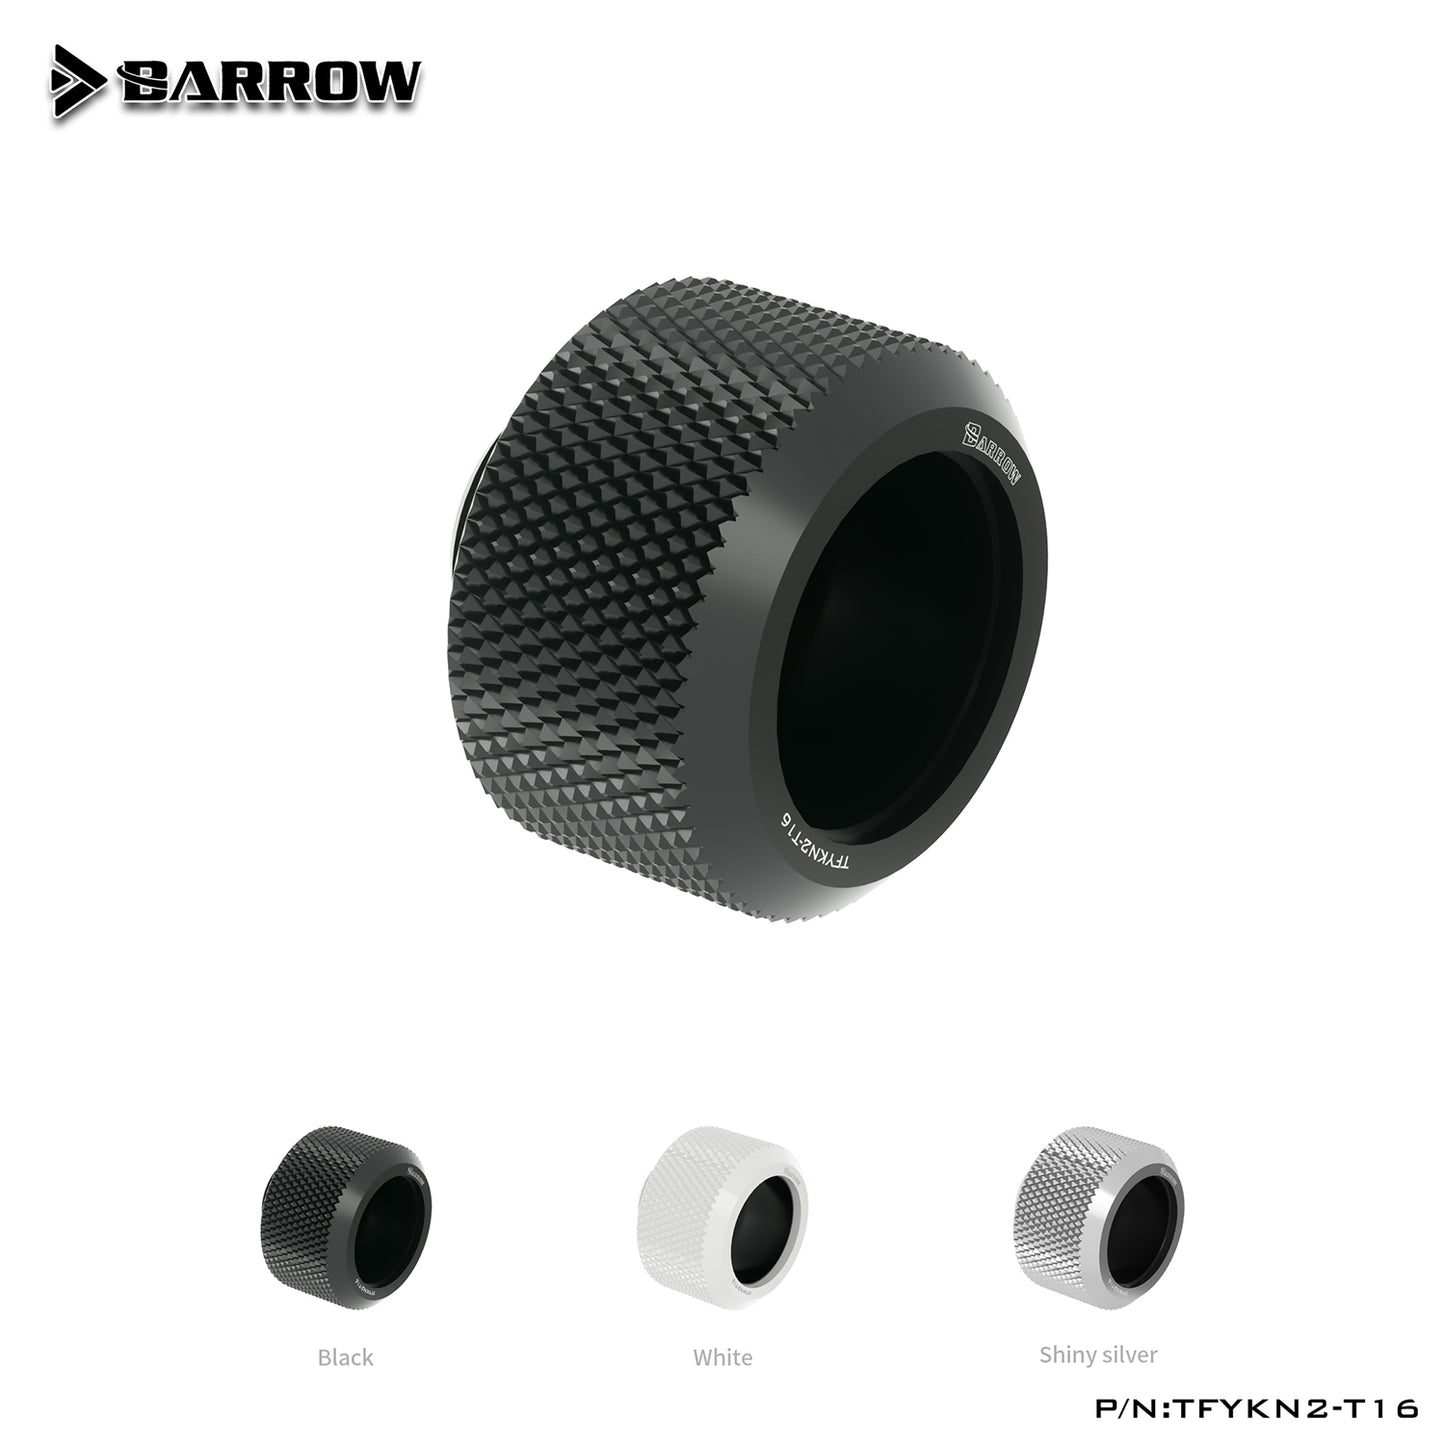 Barrow OD16mm Hard Tube Fittings Choice series, Enhanced Anti-off Rubber Ring For OD16mm Hard Tubes, TFYKN2-T16